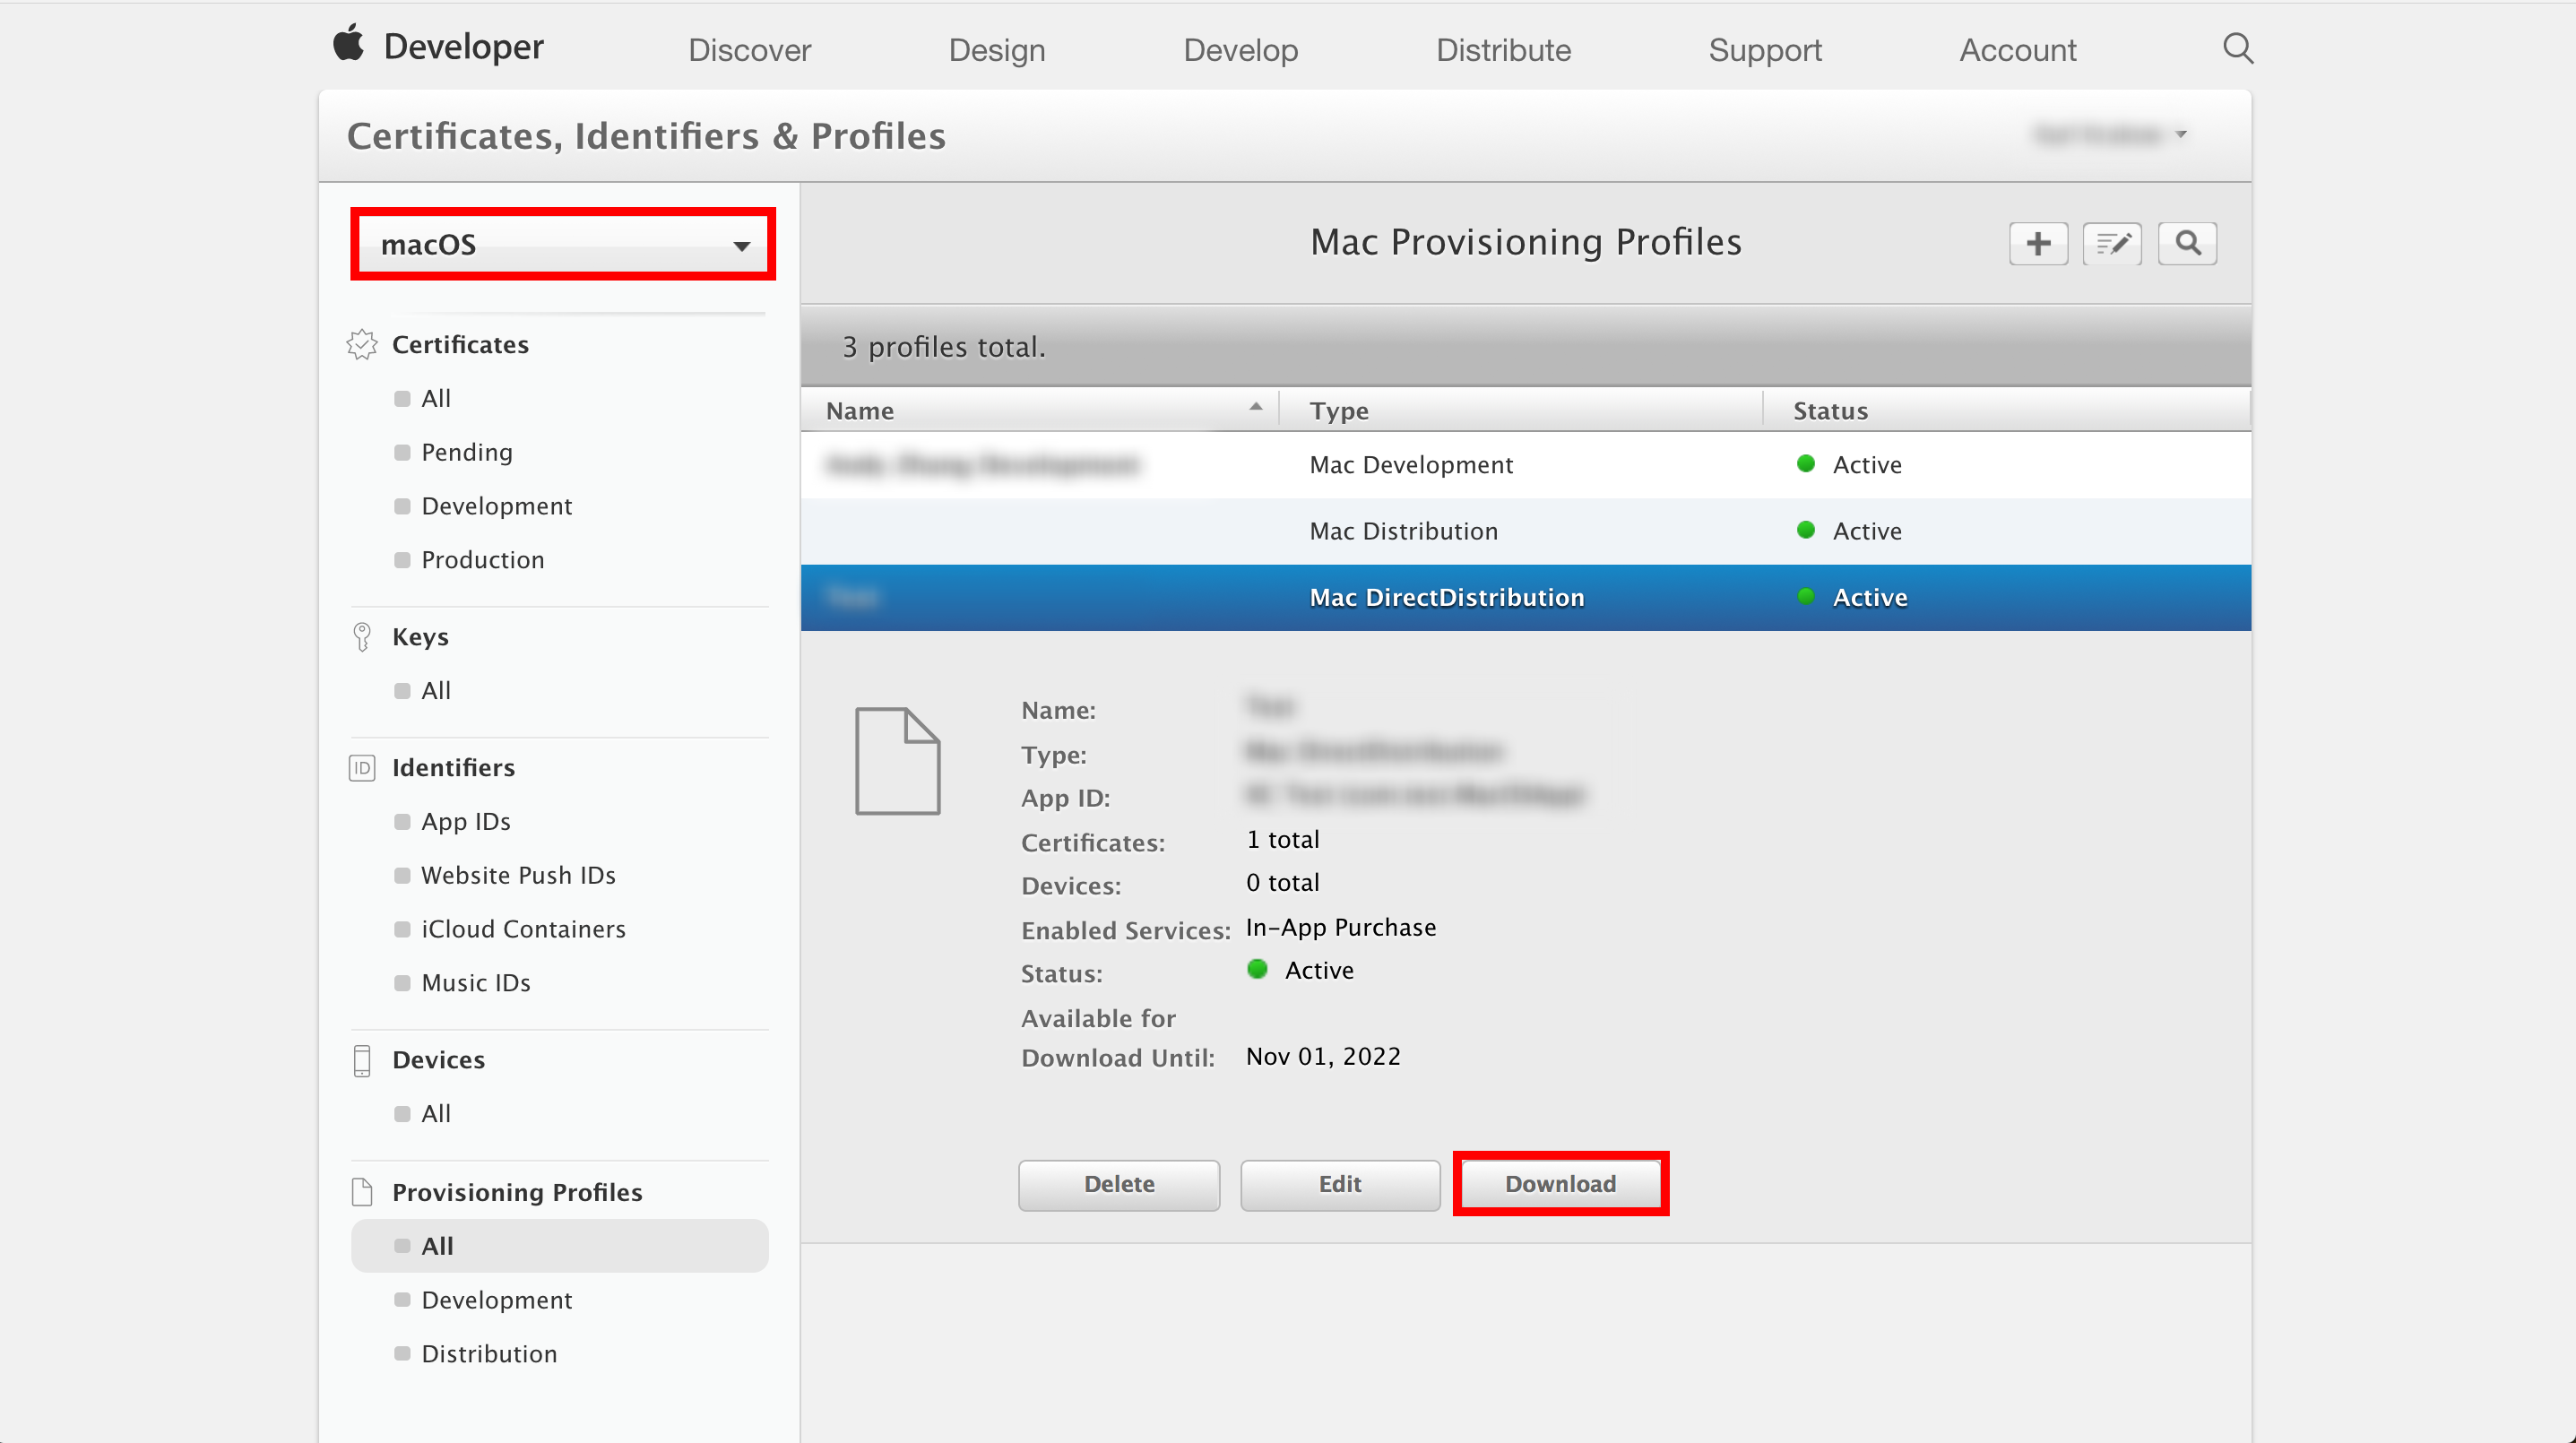 Download provisioning profile